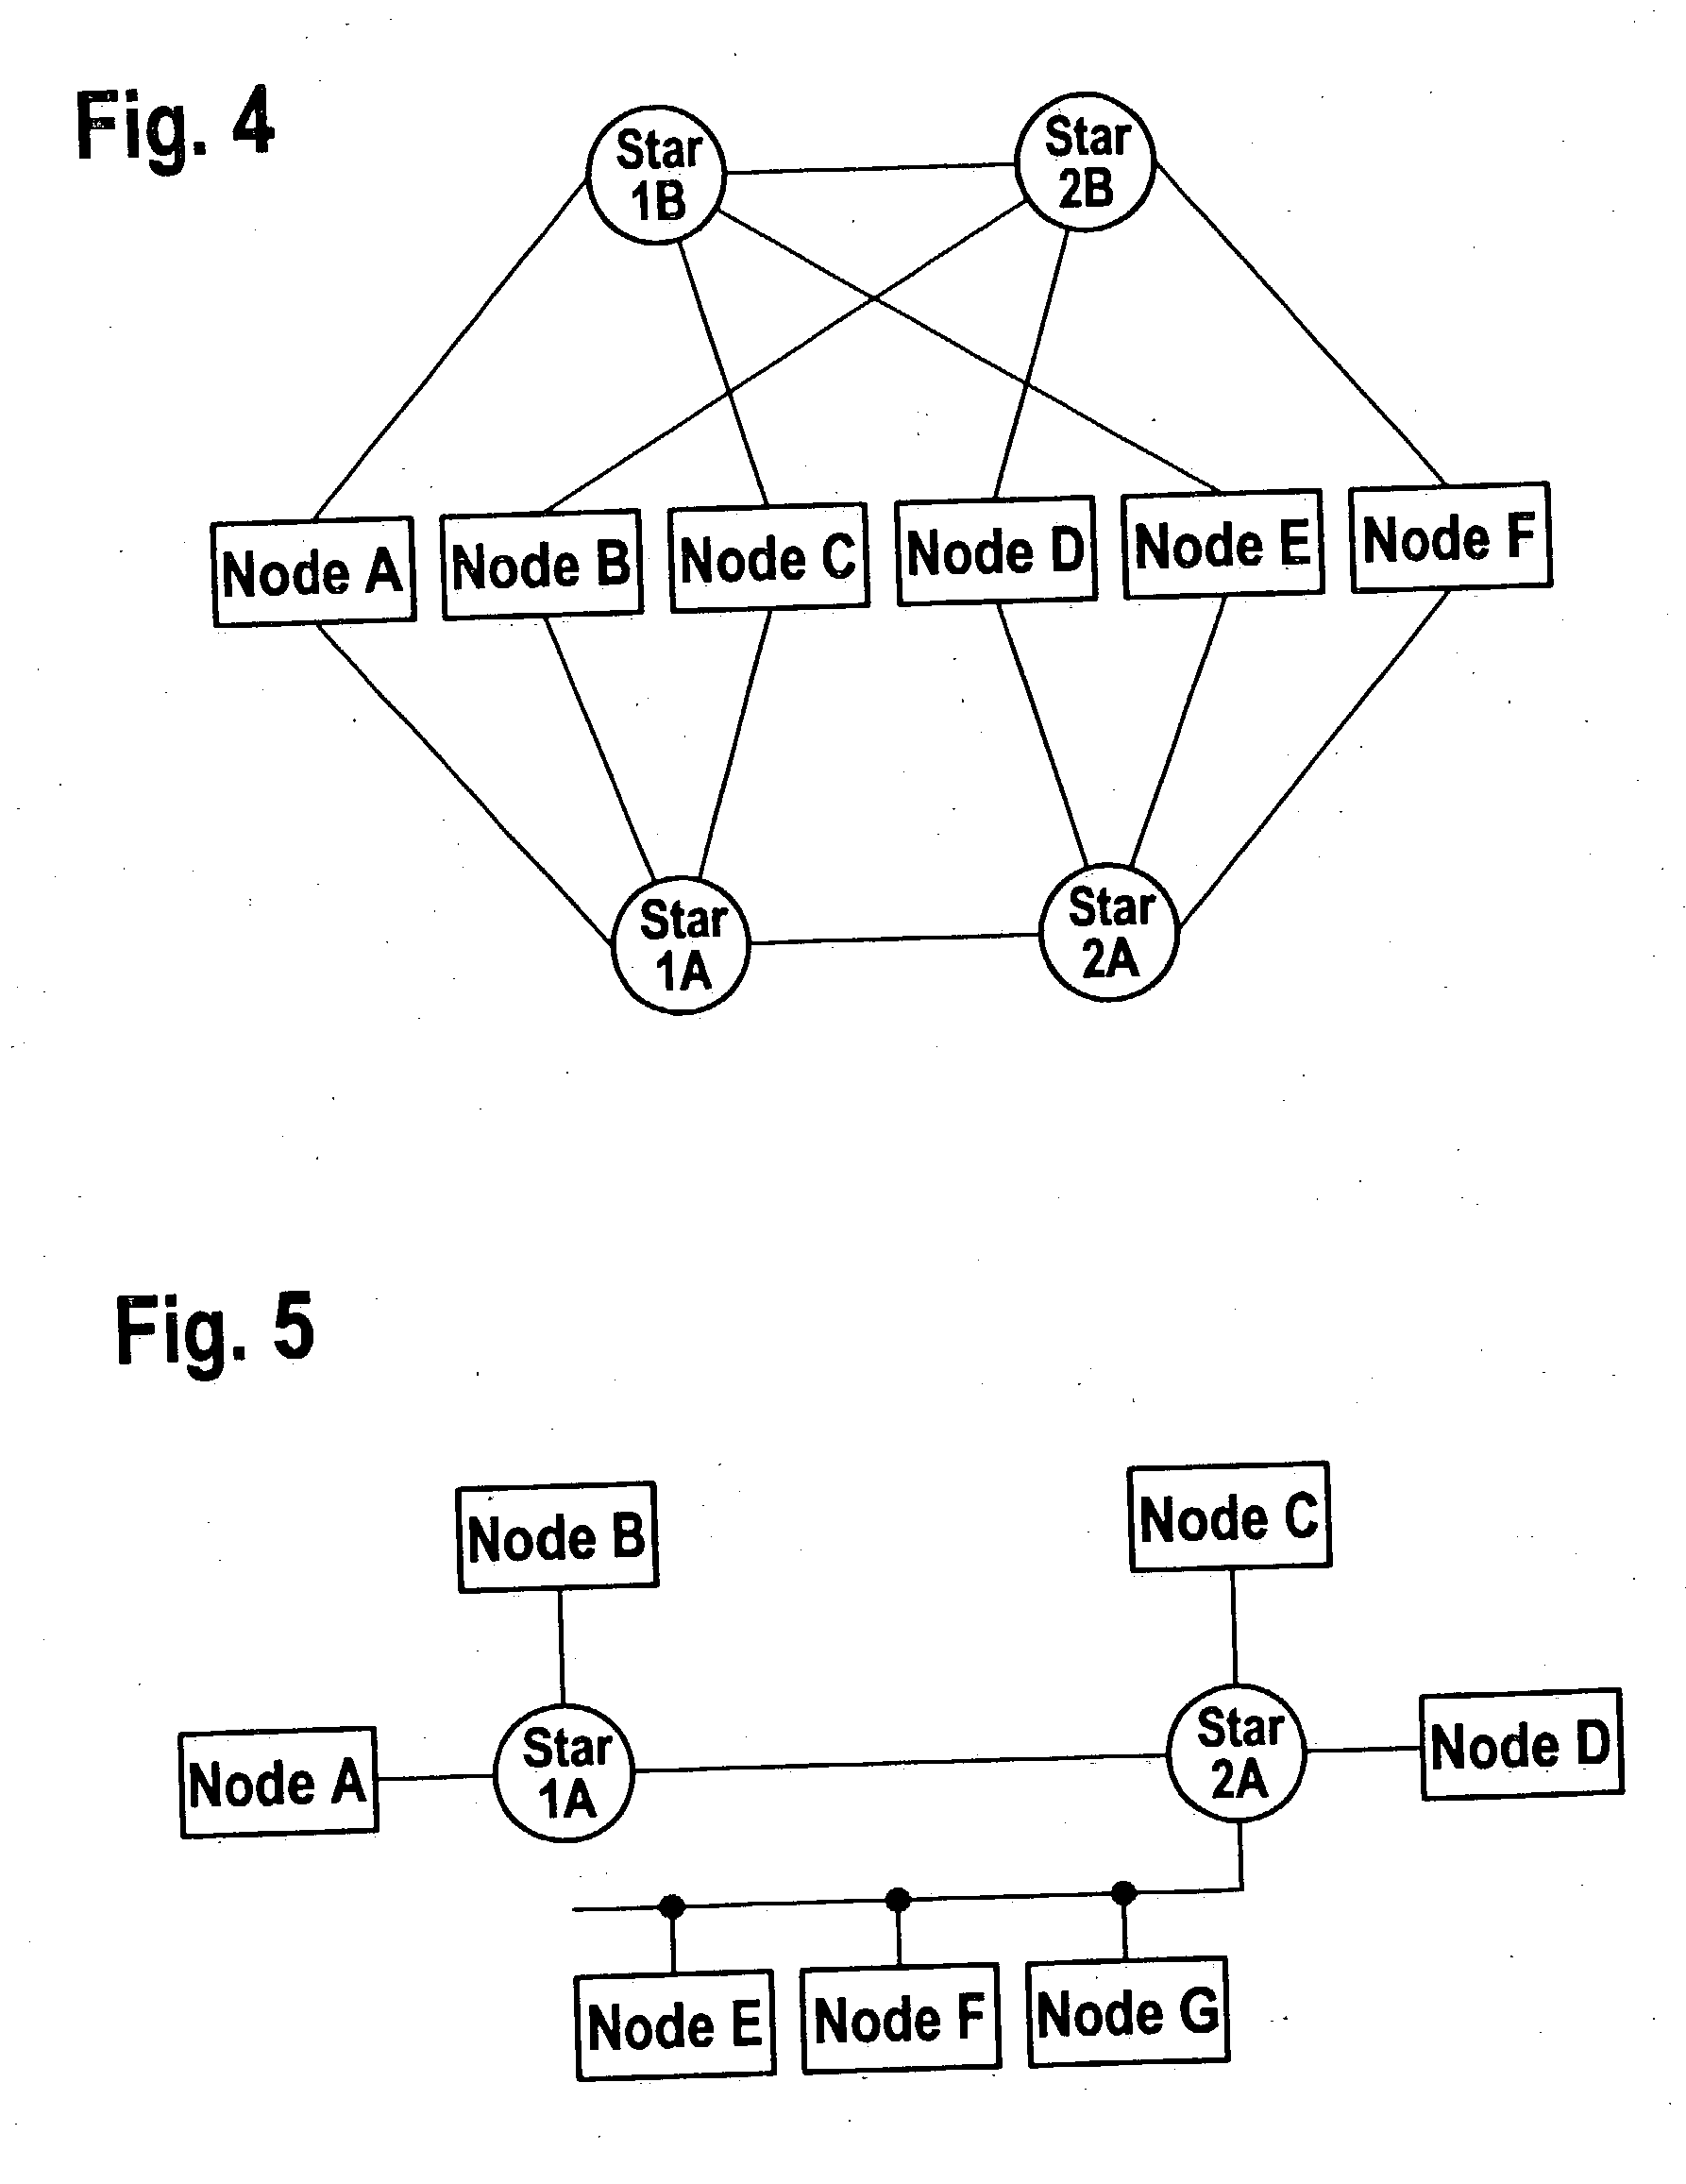 Method for synchronizing clocks in a distributed communication system